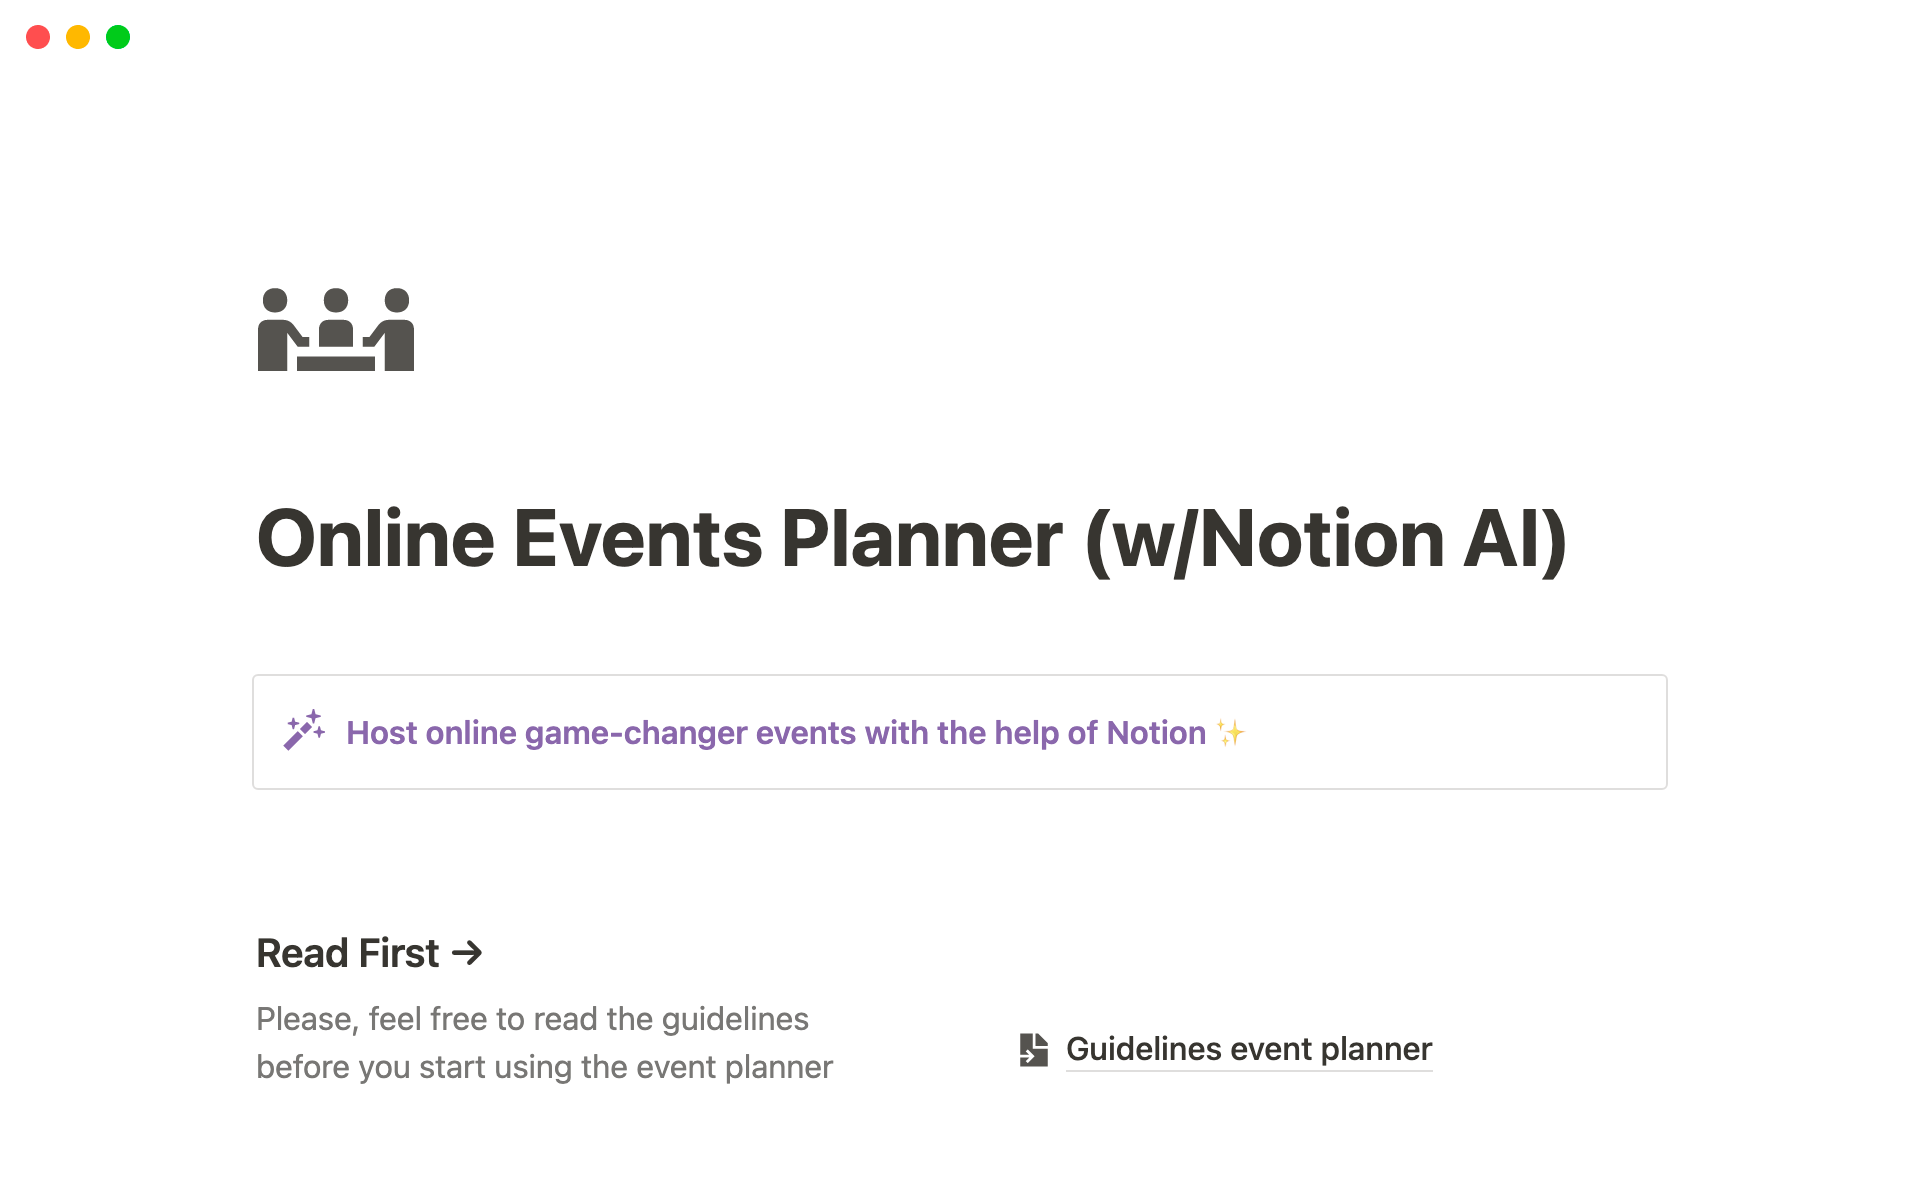 It allows users to plan, manage and host online game-changer events with the help of Notion ✨